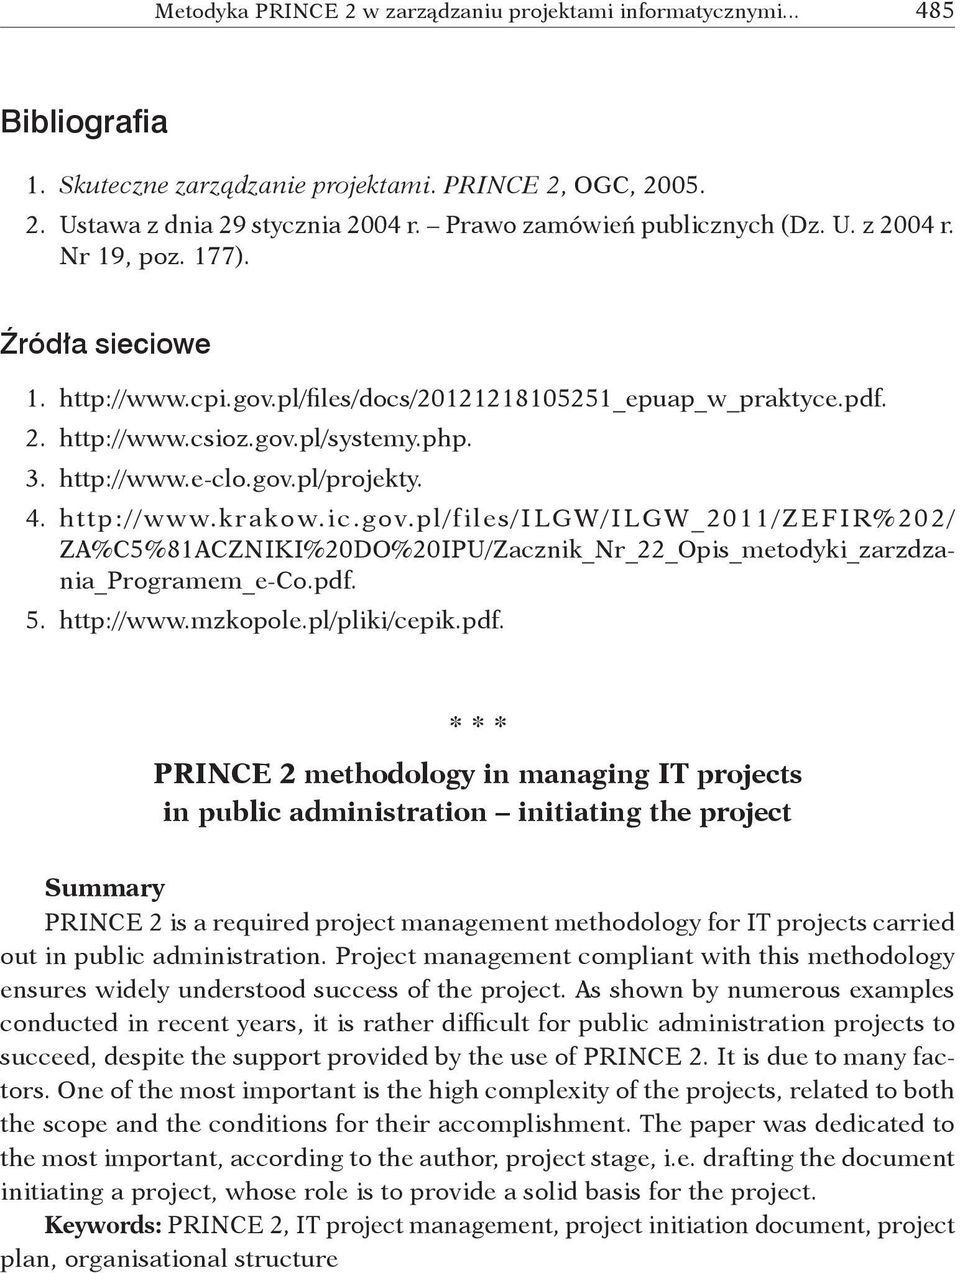 pdf. 5. http://www.mzkopole.pl/pliki/cepik.pdf. * * * PRINCE 2 methodology in managing IT projects in public administration initiating the project Summary PRINCE 2 is a required project management